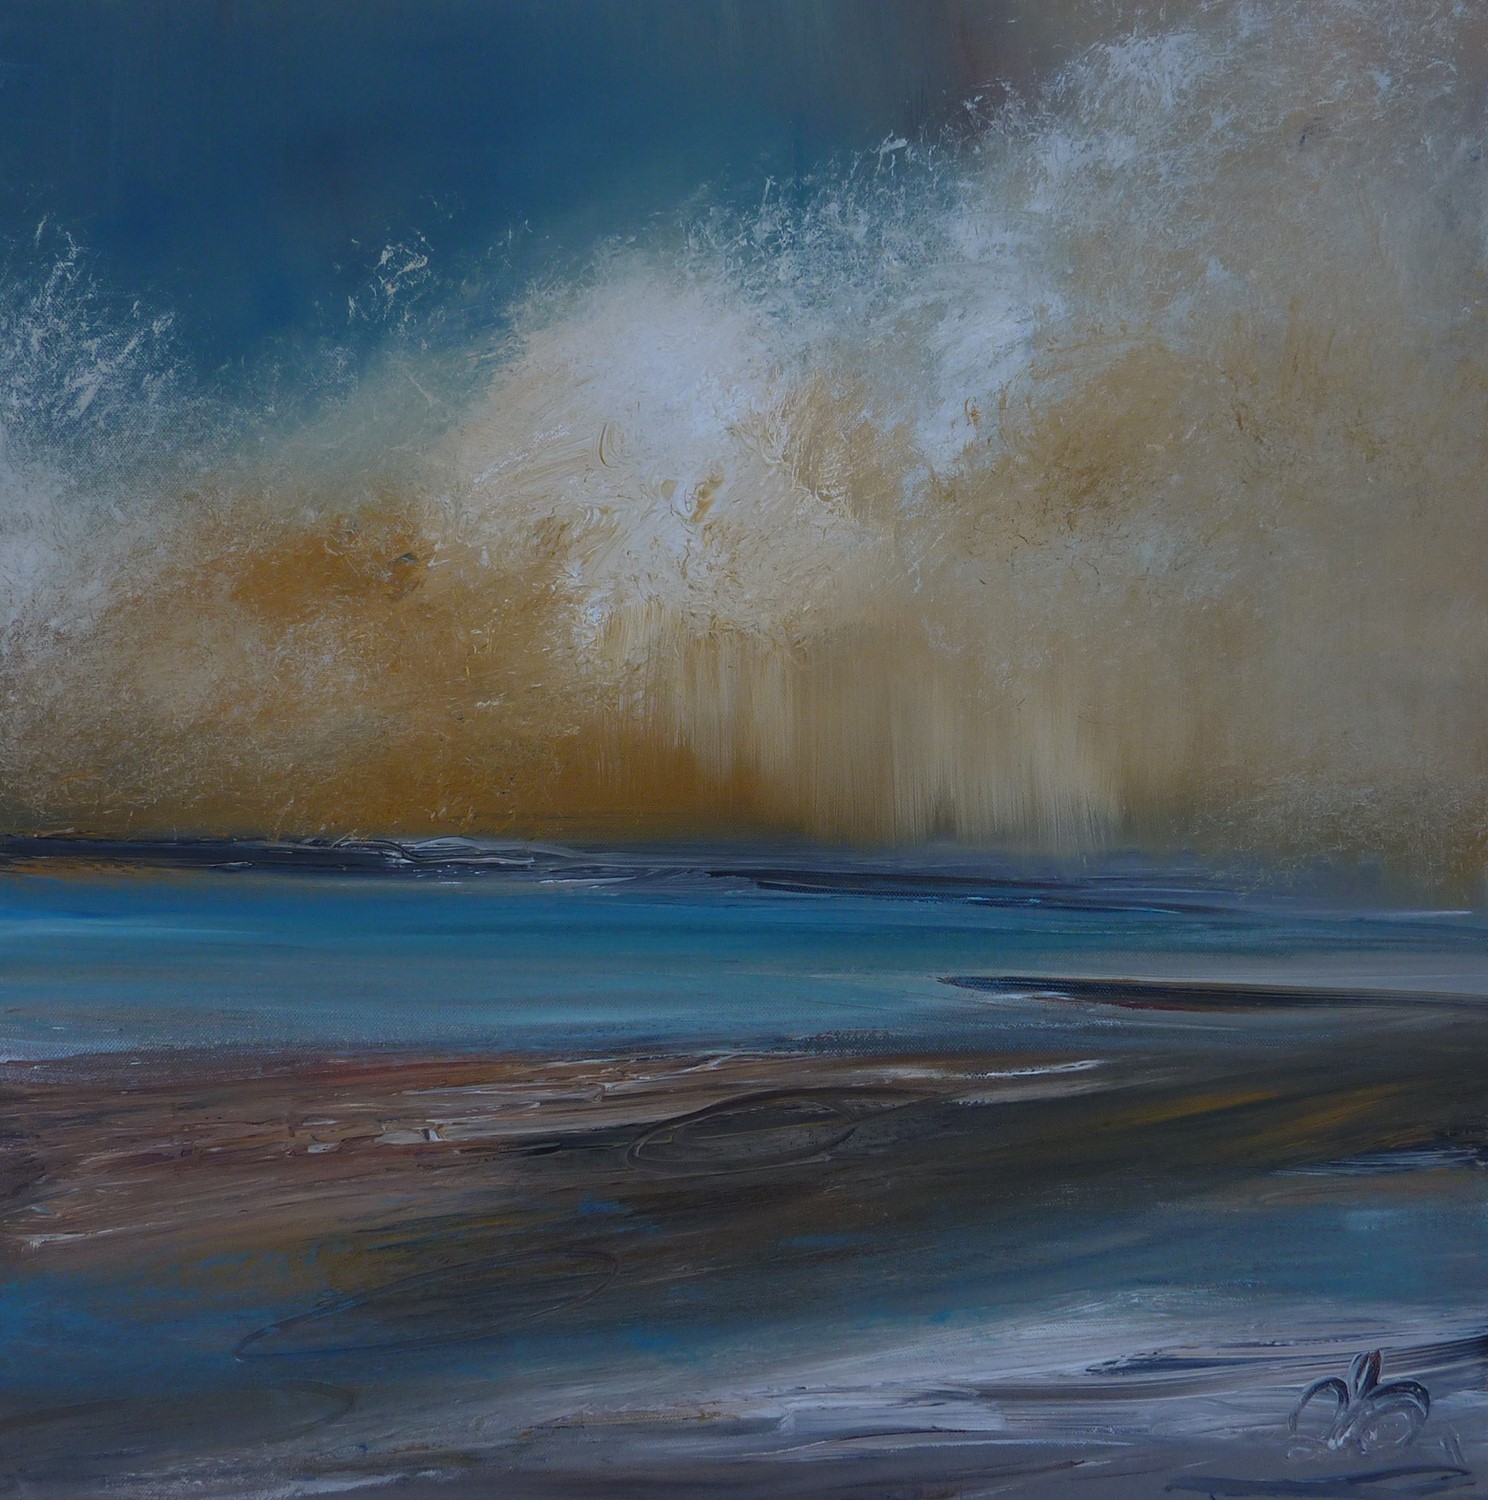 'Light and Showers' by artist Rosanne Barr